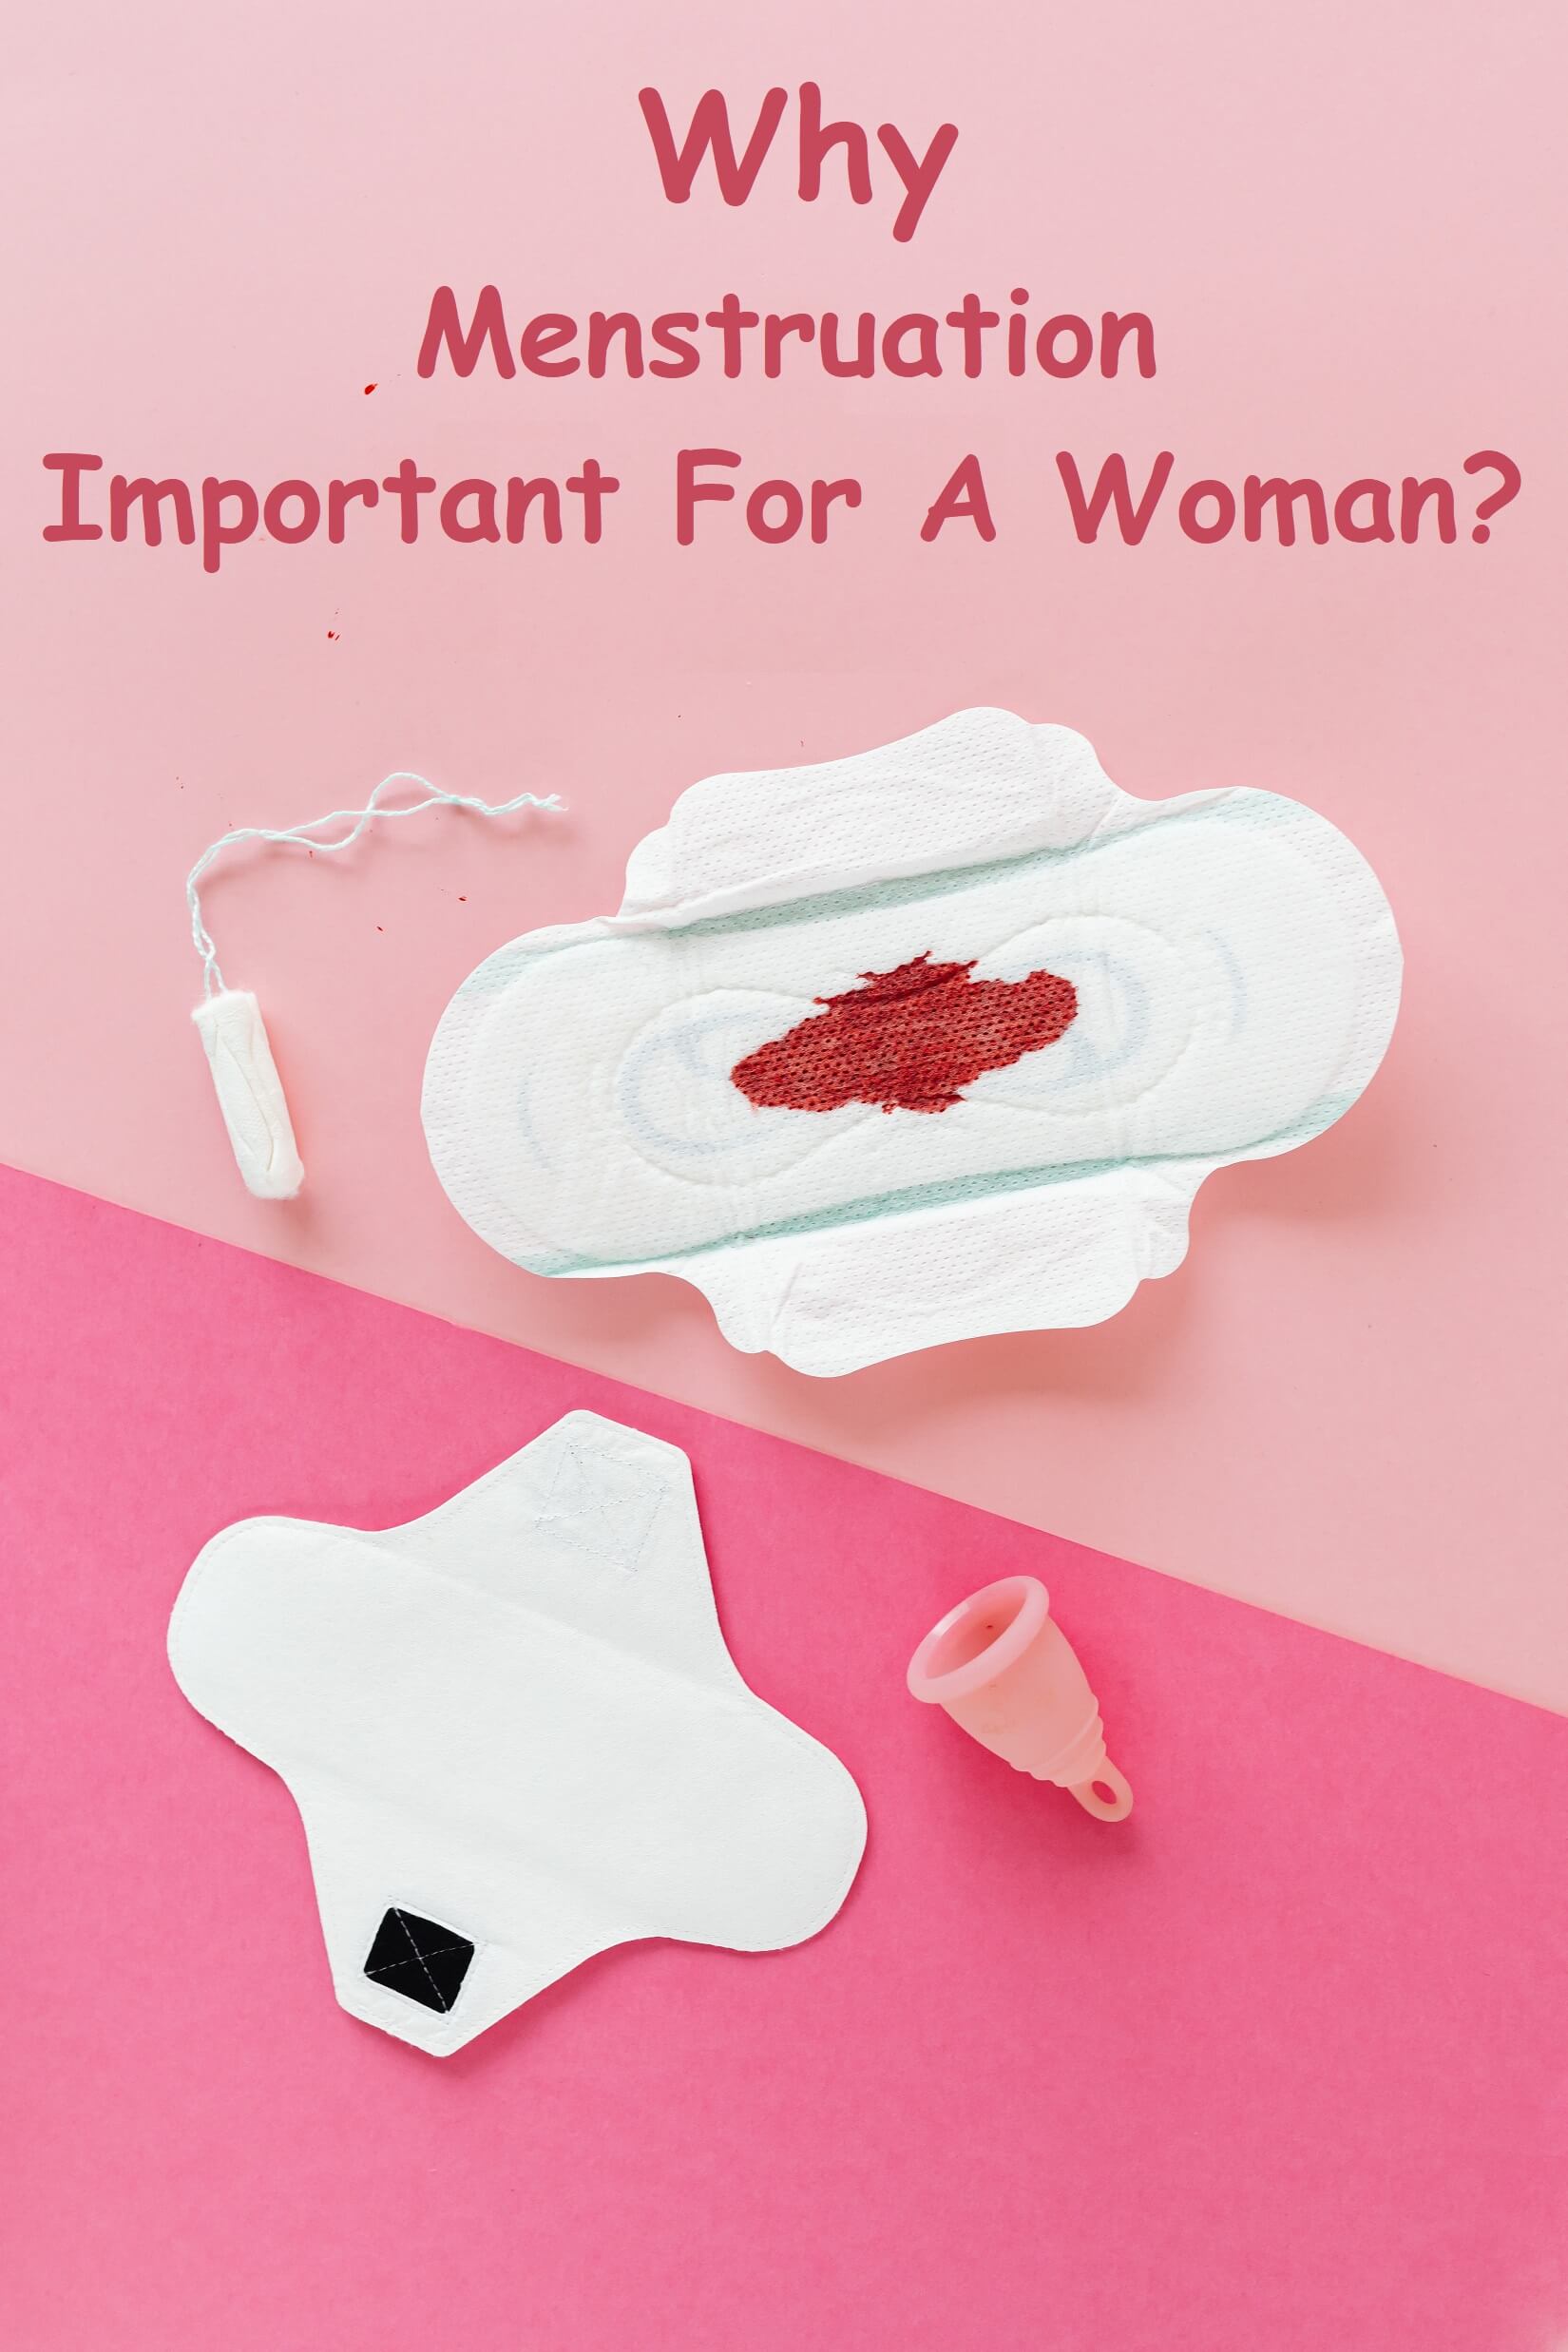 why menstruation important for women